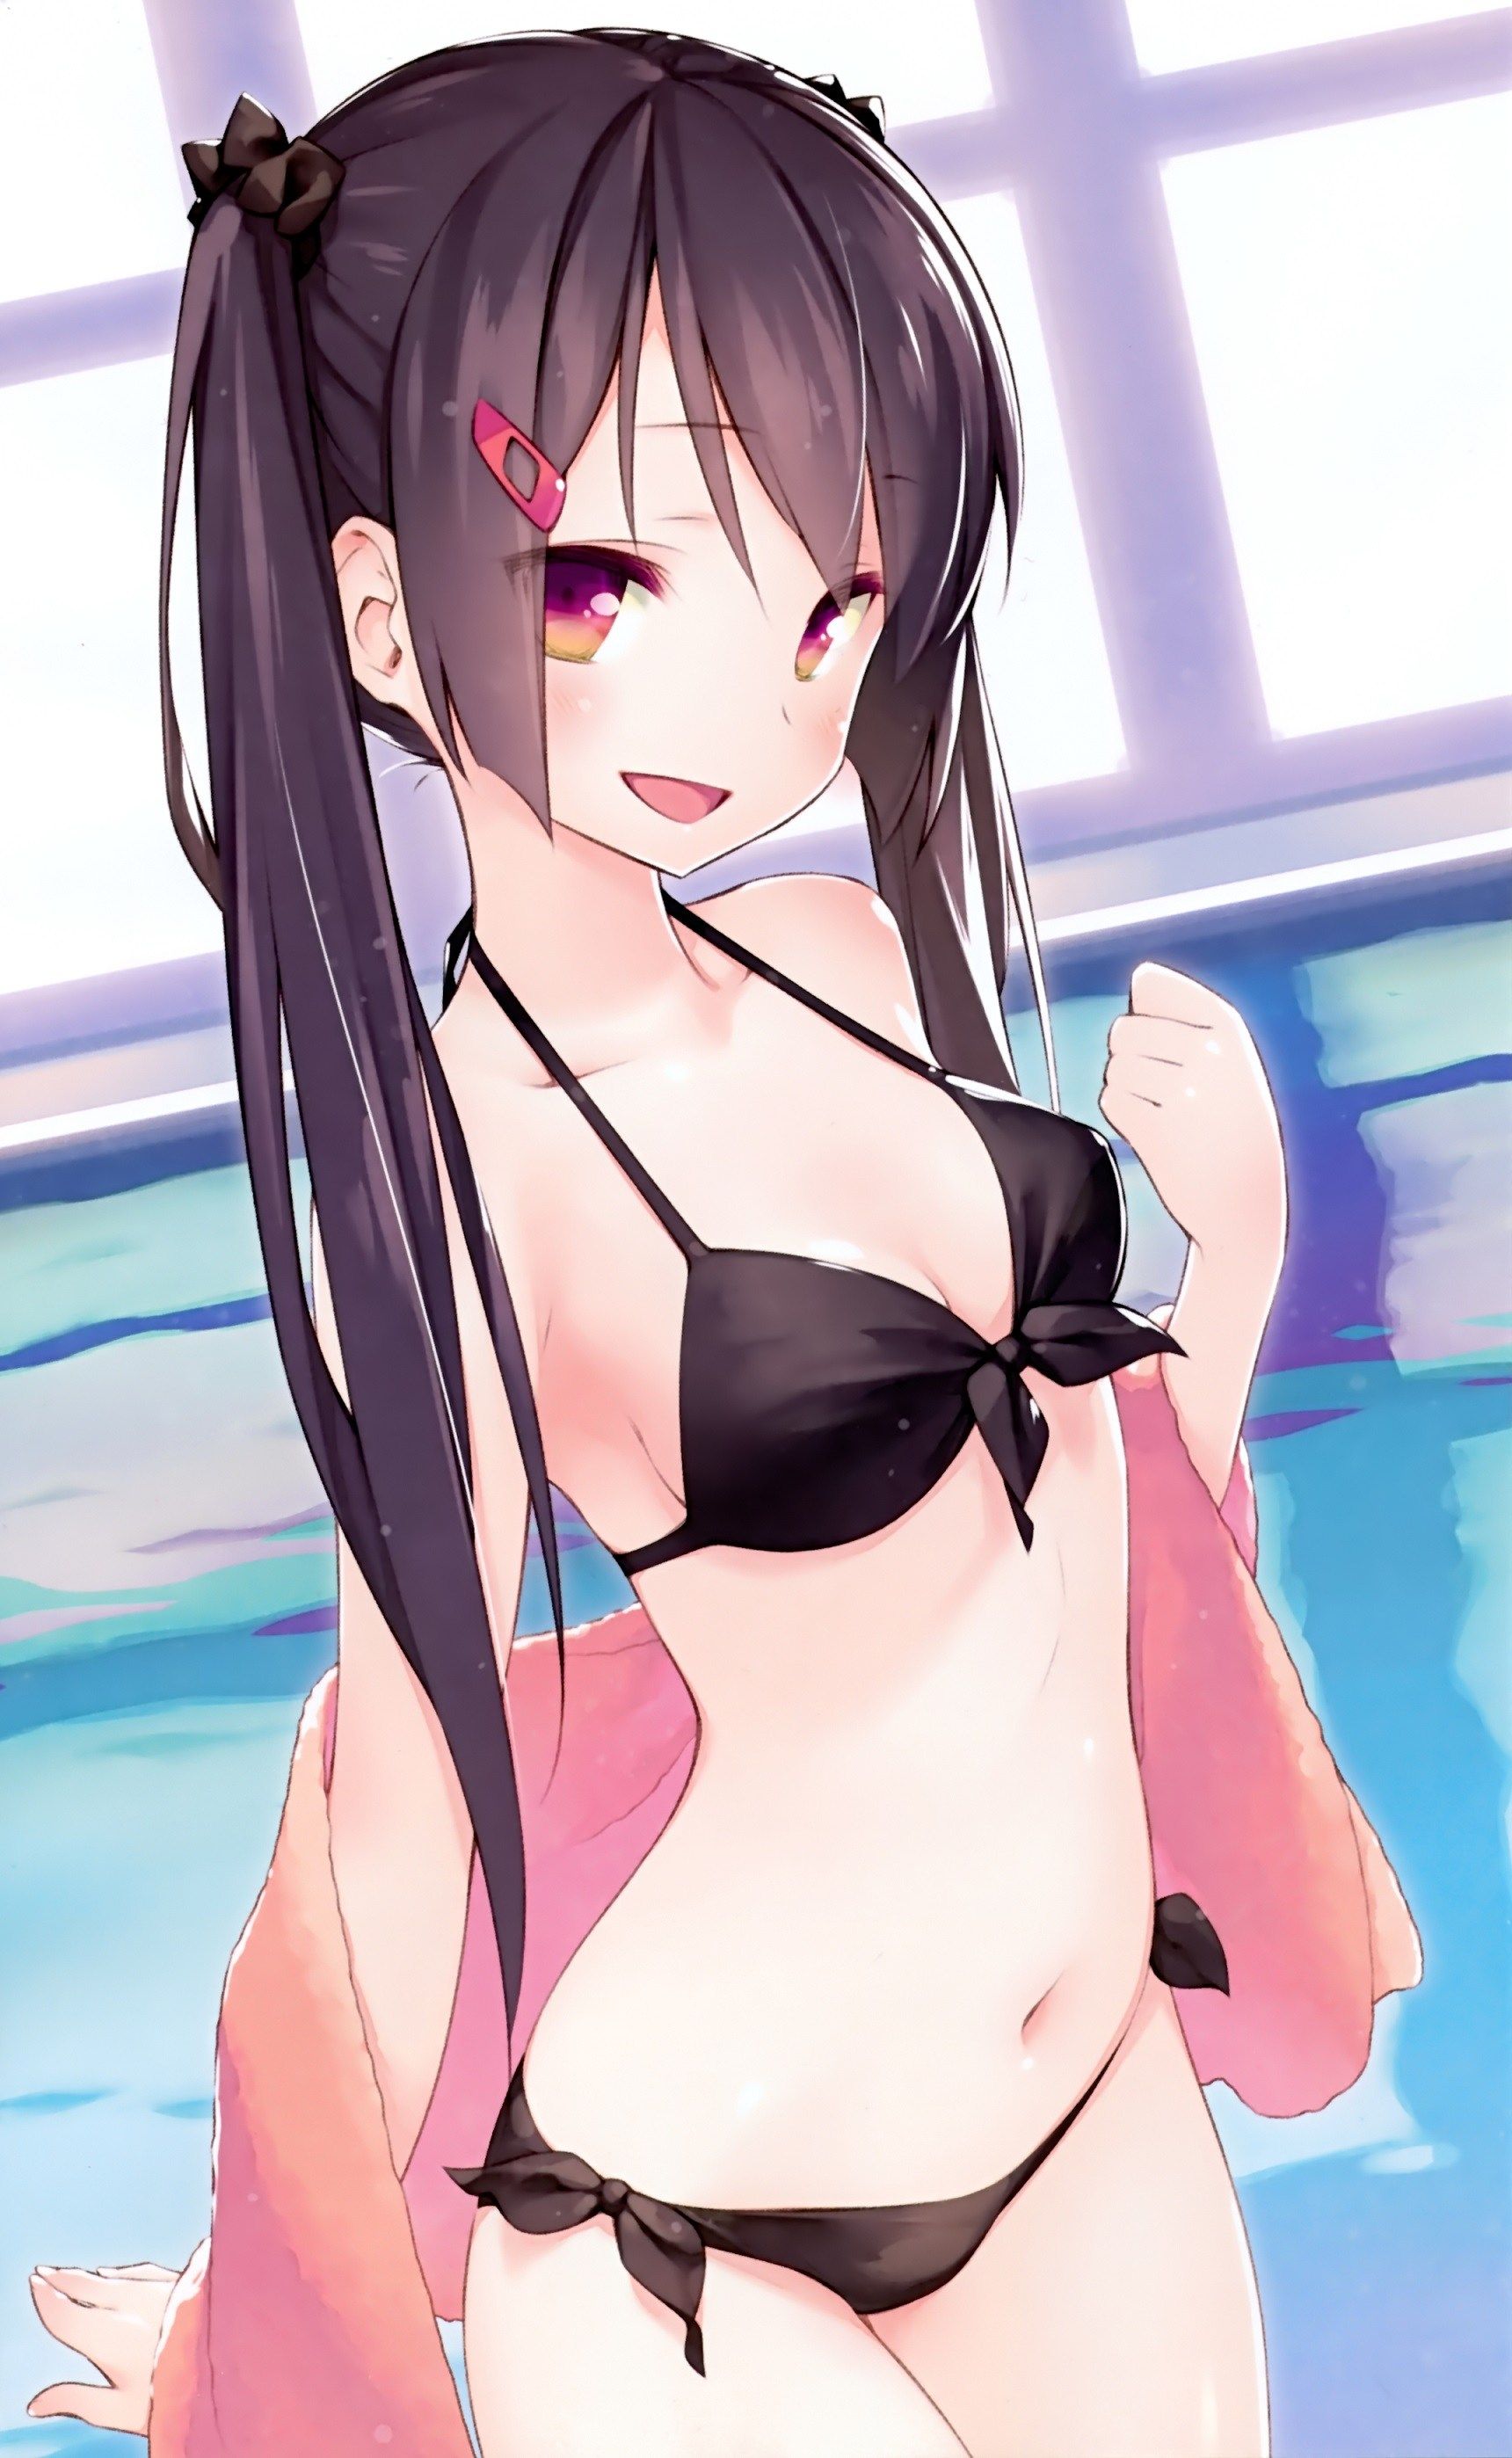 Please feel like summer swimsuit pictures 9